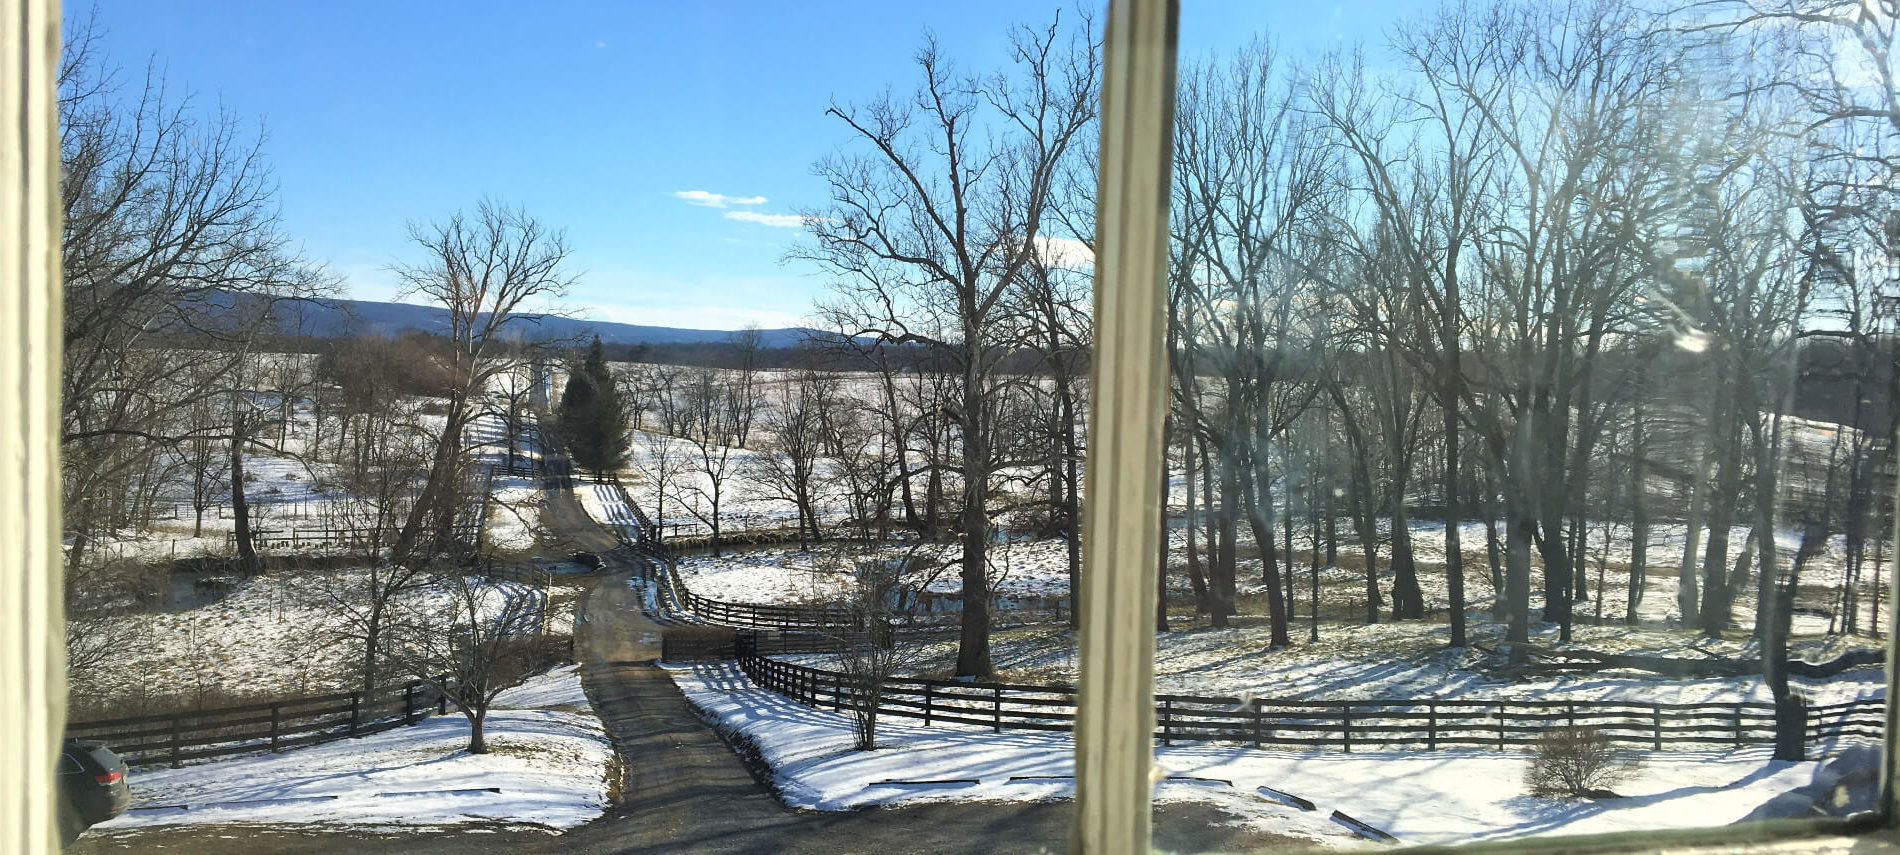 View from window of snow-covered walking paths and blue skies